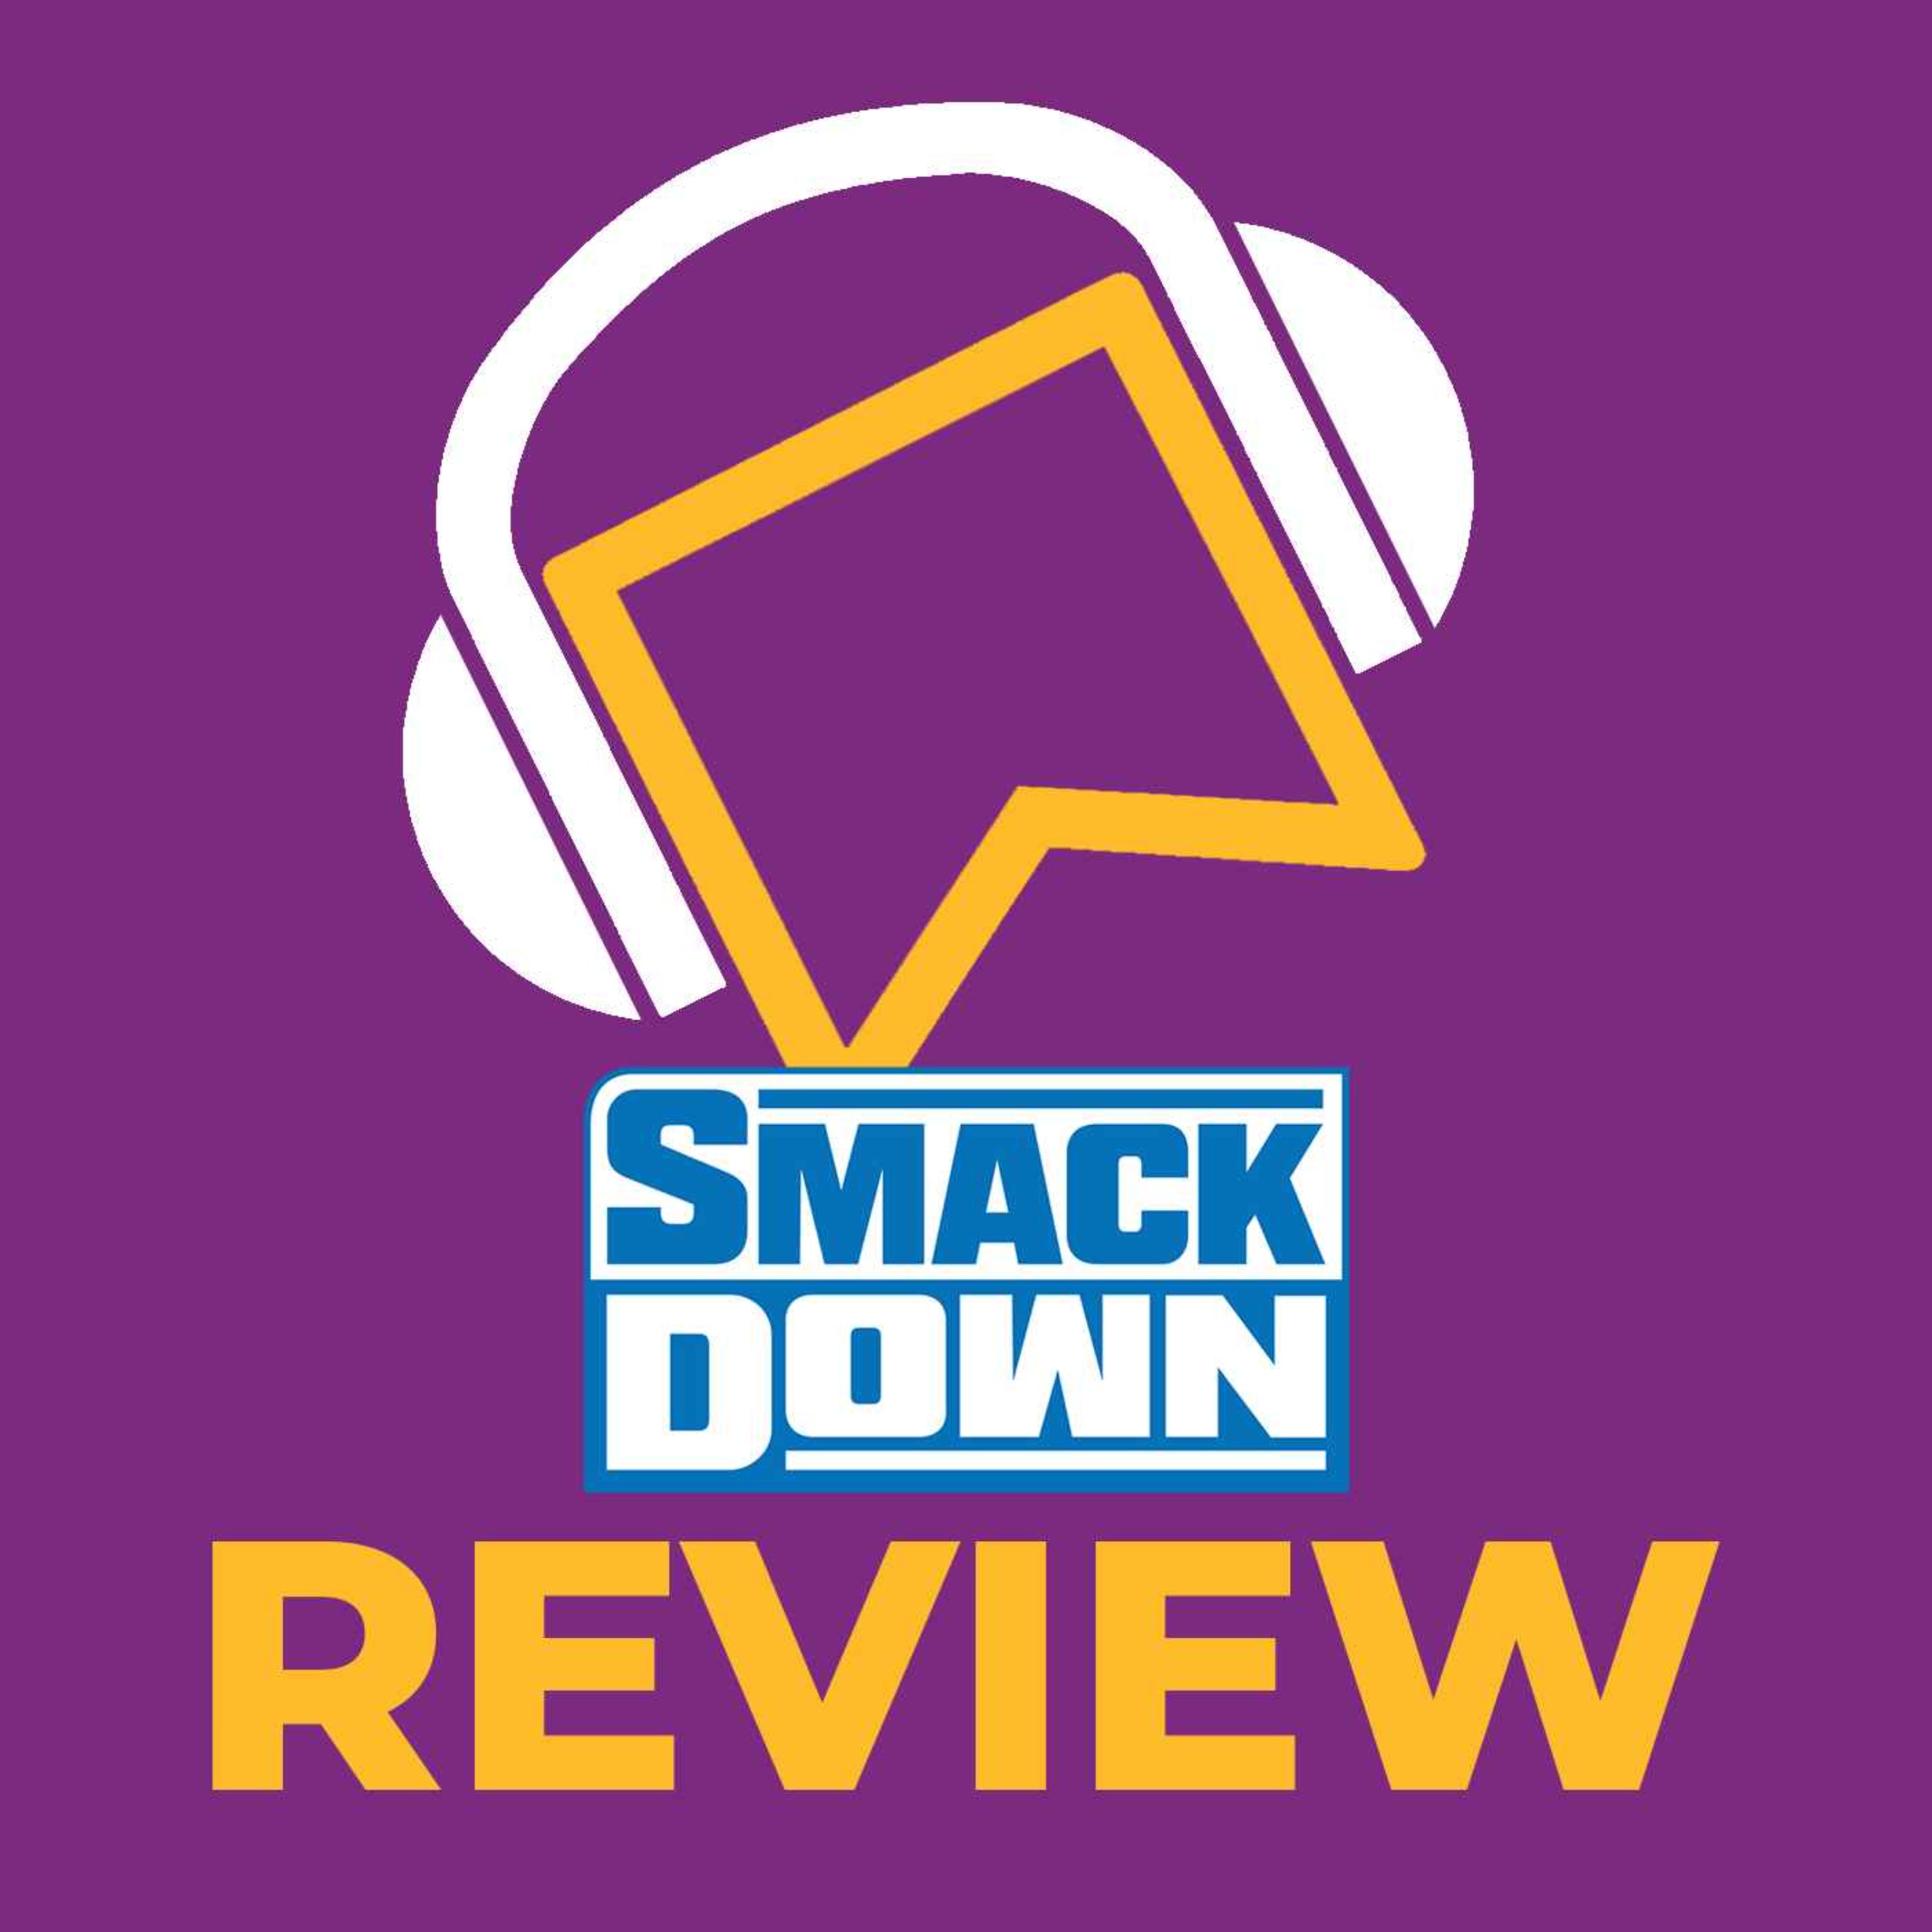 WWE SmackDown Review - The Bloodline DESTROY Kevin Owens! AJ Styles Is The #1 Contender! Tiffany Stratton Crashes The Women's Title Match! A-Town Down Under Mug Off Triple H?!